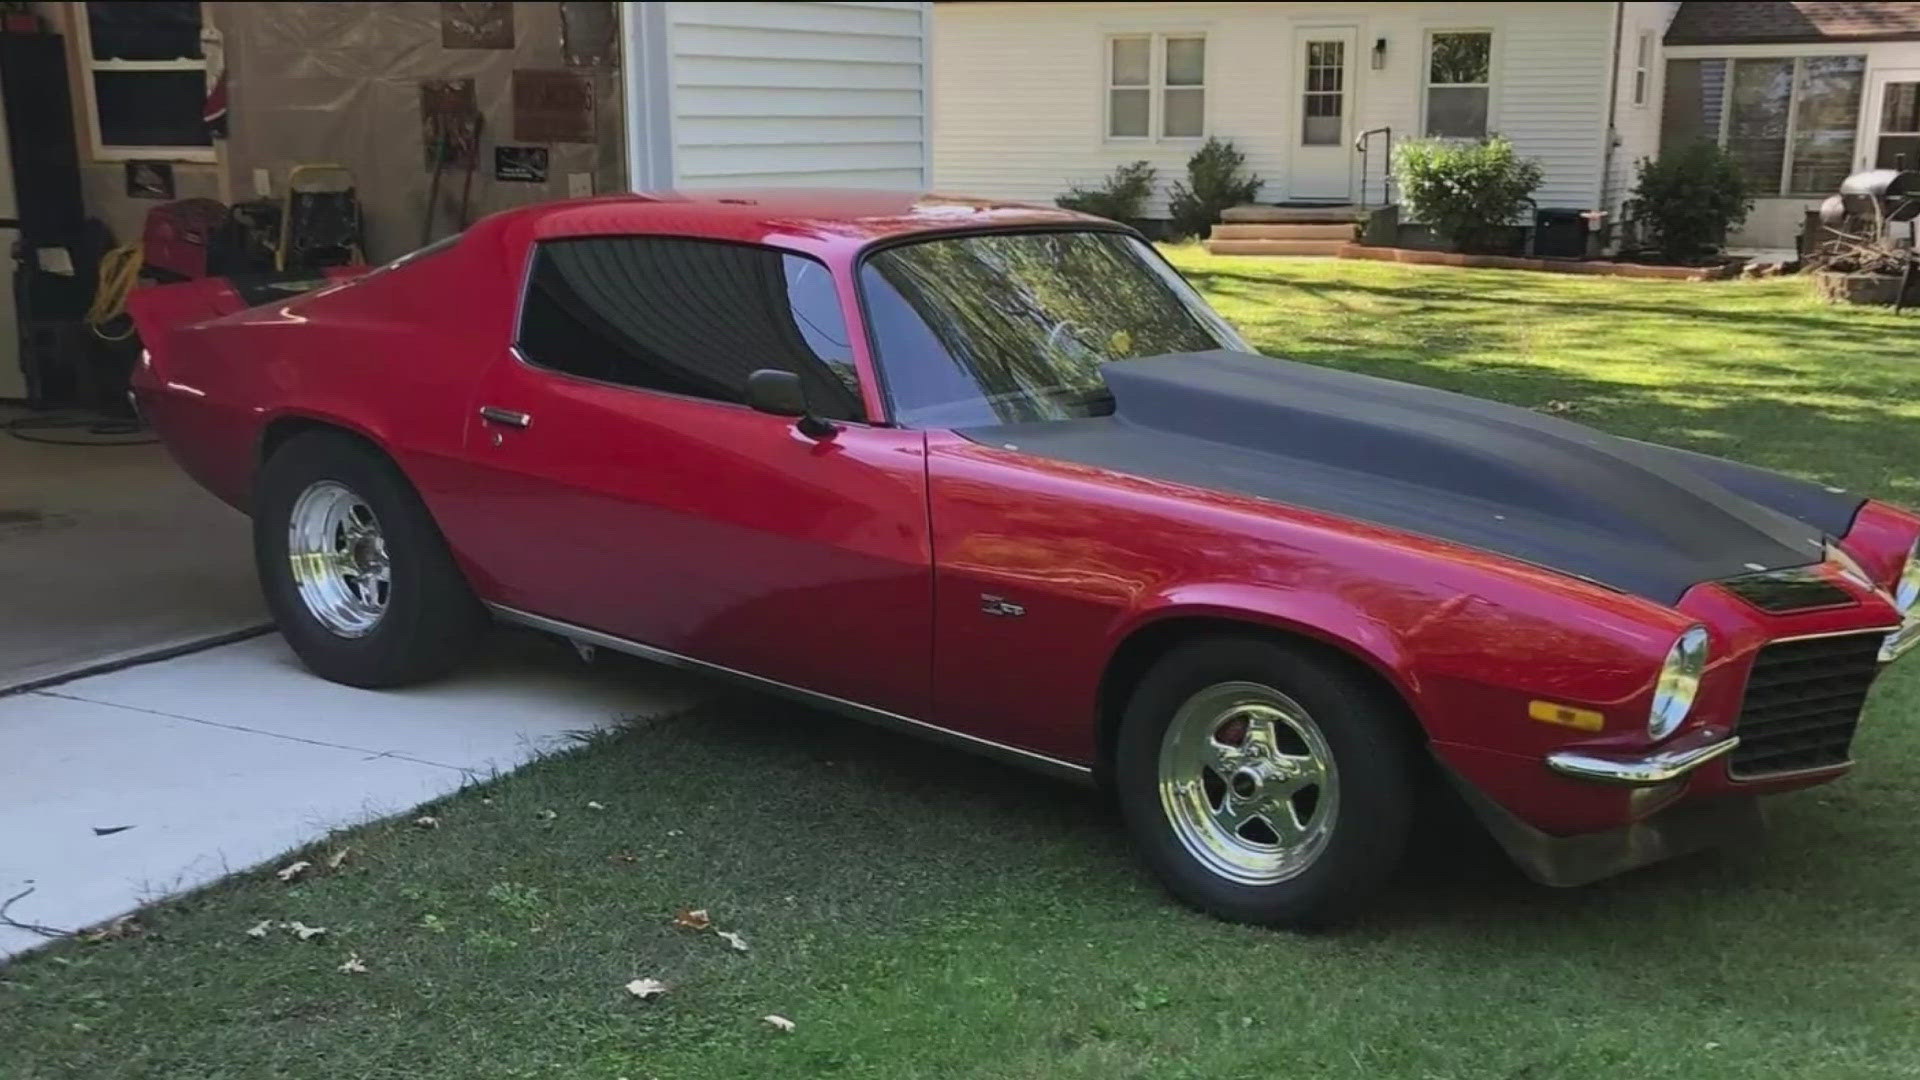 Dean Holley says his 1972 Z28 red Chevrolet Camaro Split Bumper was stolen out of his garage during the overnight hours of June 13-14.